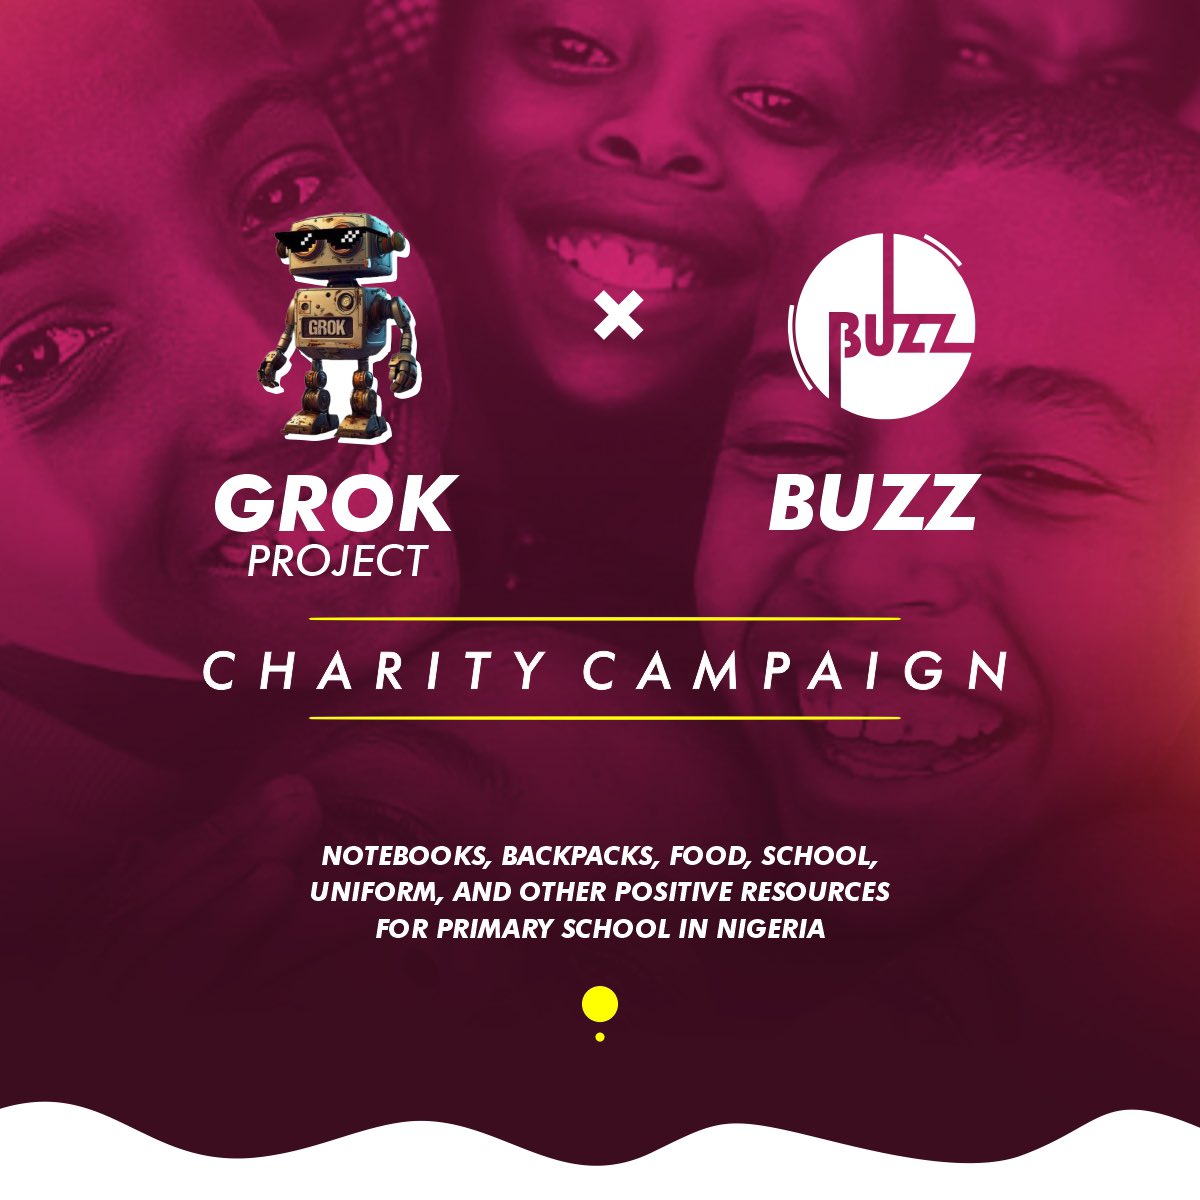 📣 ANNOUNCEMENT 📣 @we_are_buzz and @Grok_Project will be working on a charity campaign with one of the biggest crypto project @Grok_Project thanks so much #grokfamily for the opportunity #grokgives #grokiscontigeous #grok2theworld